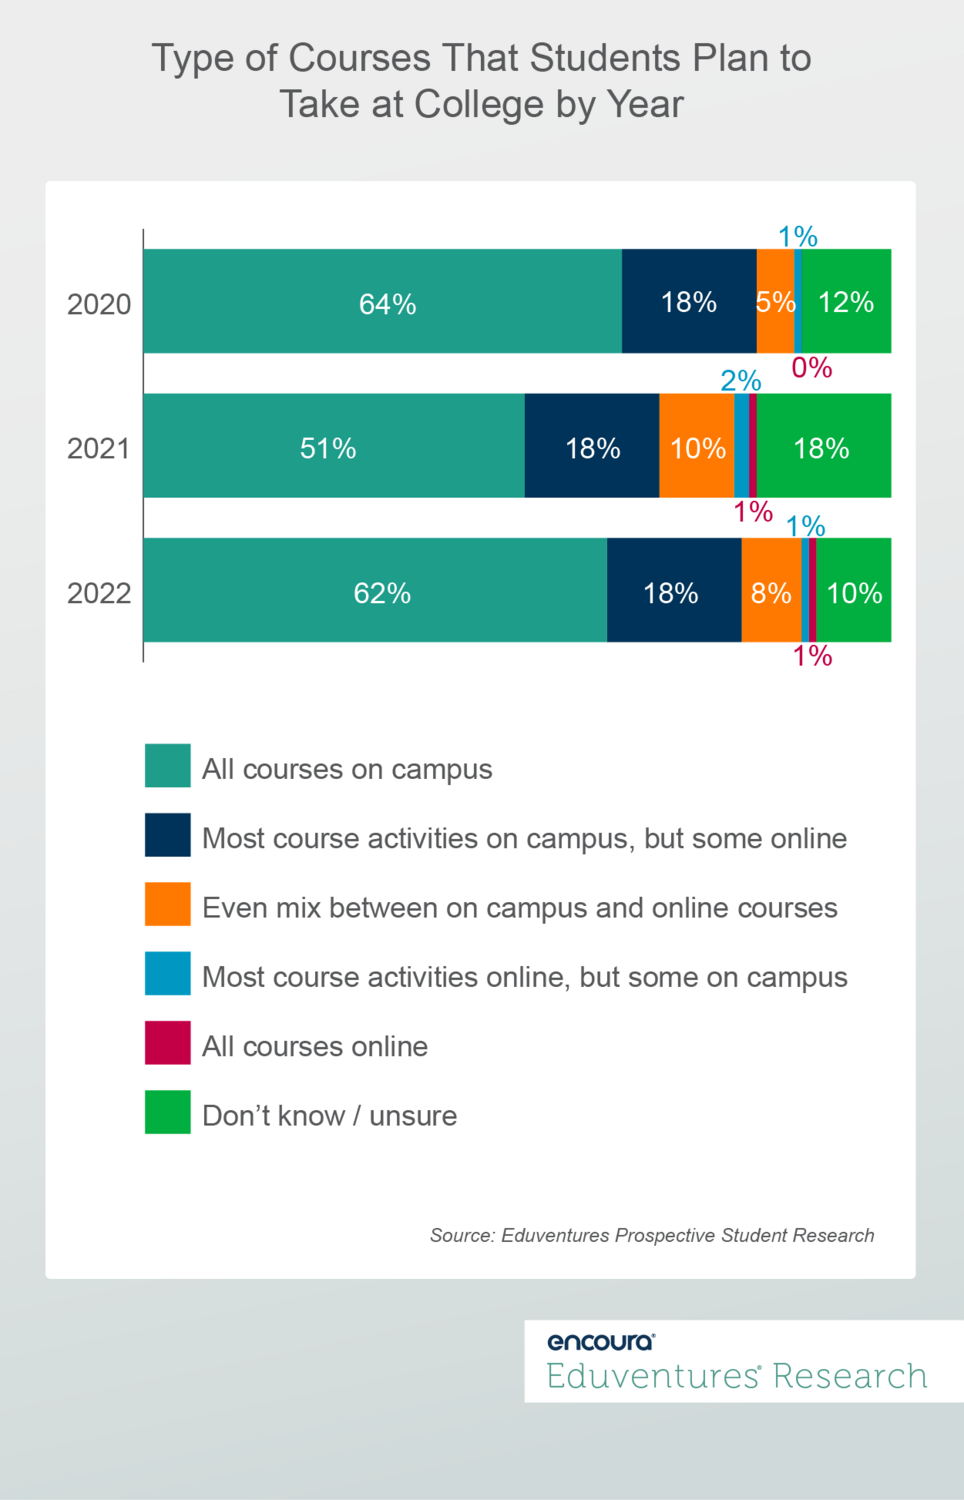 Type of Courses That Students Plan to Take at College by Year